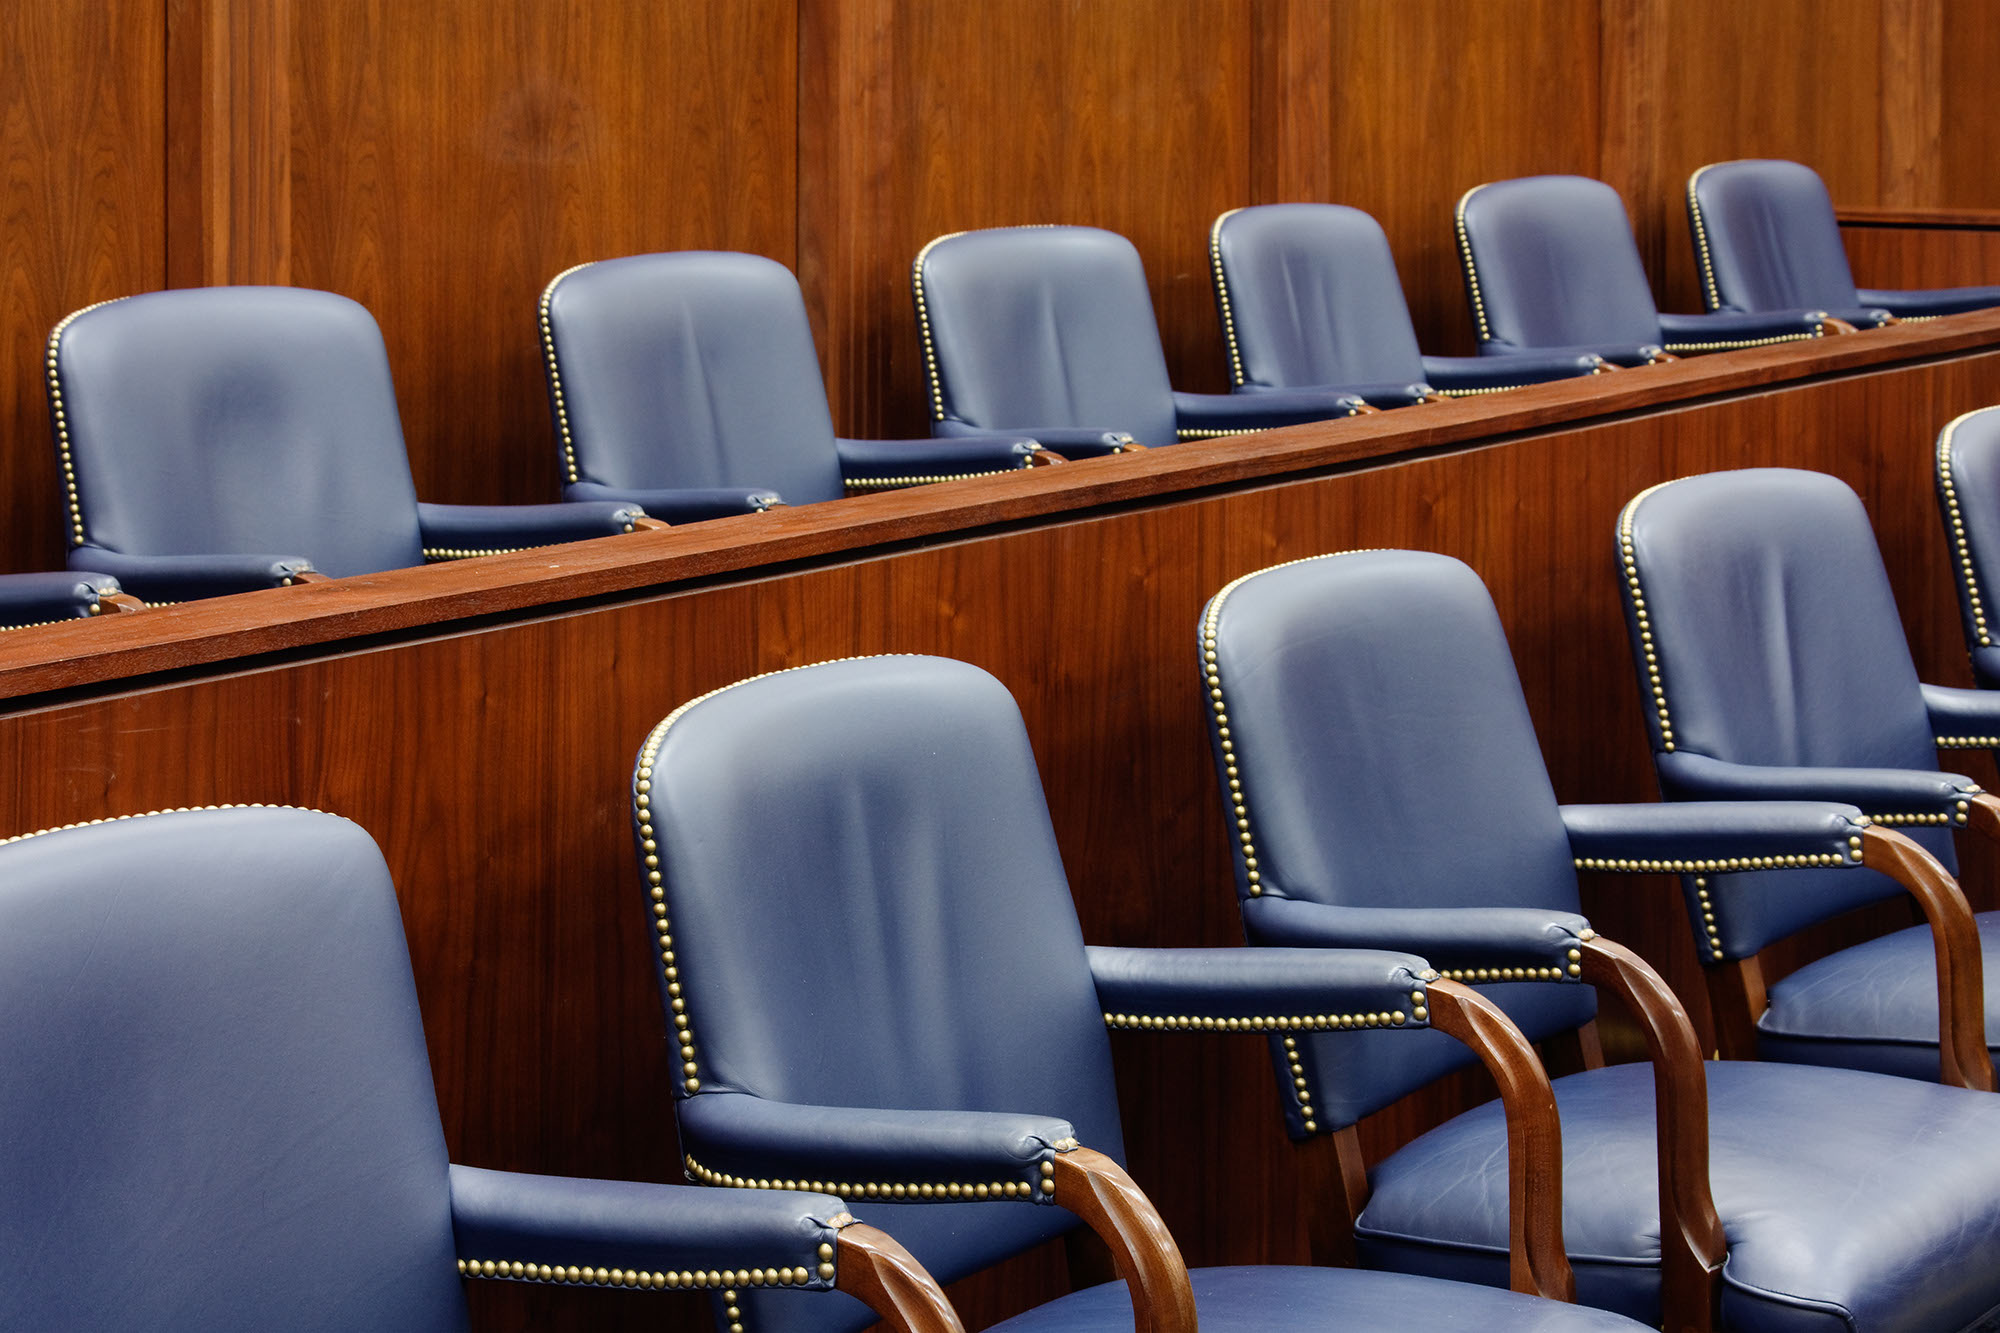 A stock phot of two rows of empty jury seats in a courtroom